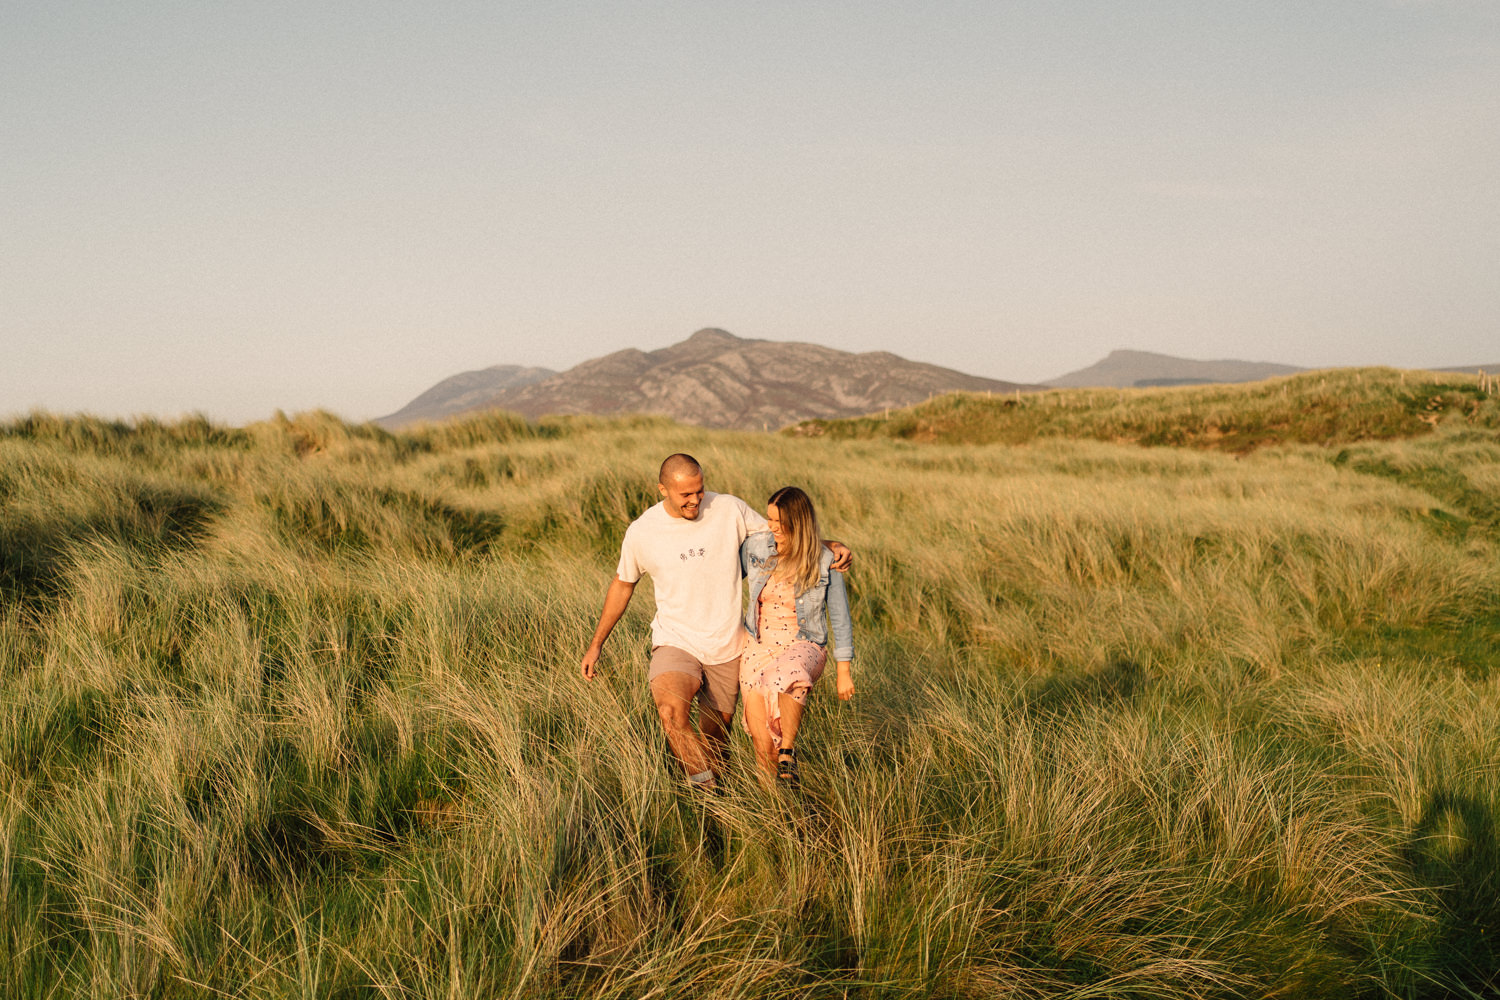 couple walking through the grass with mountains in the background on their engagement shoot Northern Ireland Wedding Photographer